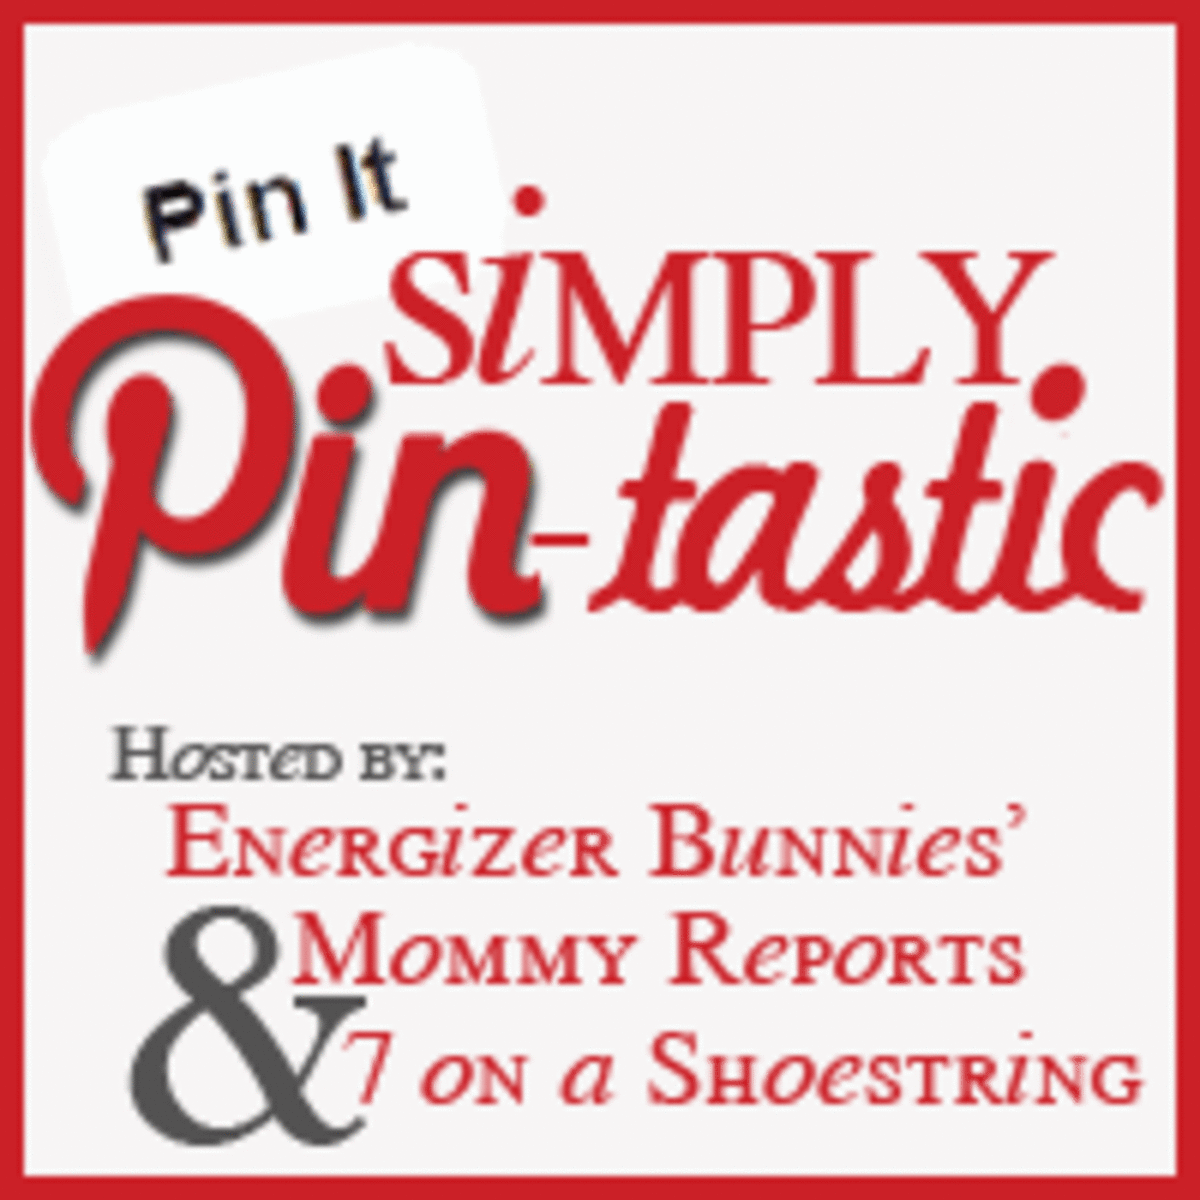 Create a catchy image like the one from 7onashoestring and encourage your readers to post their favorite pins.